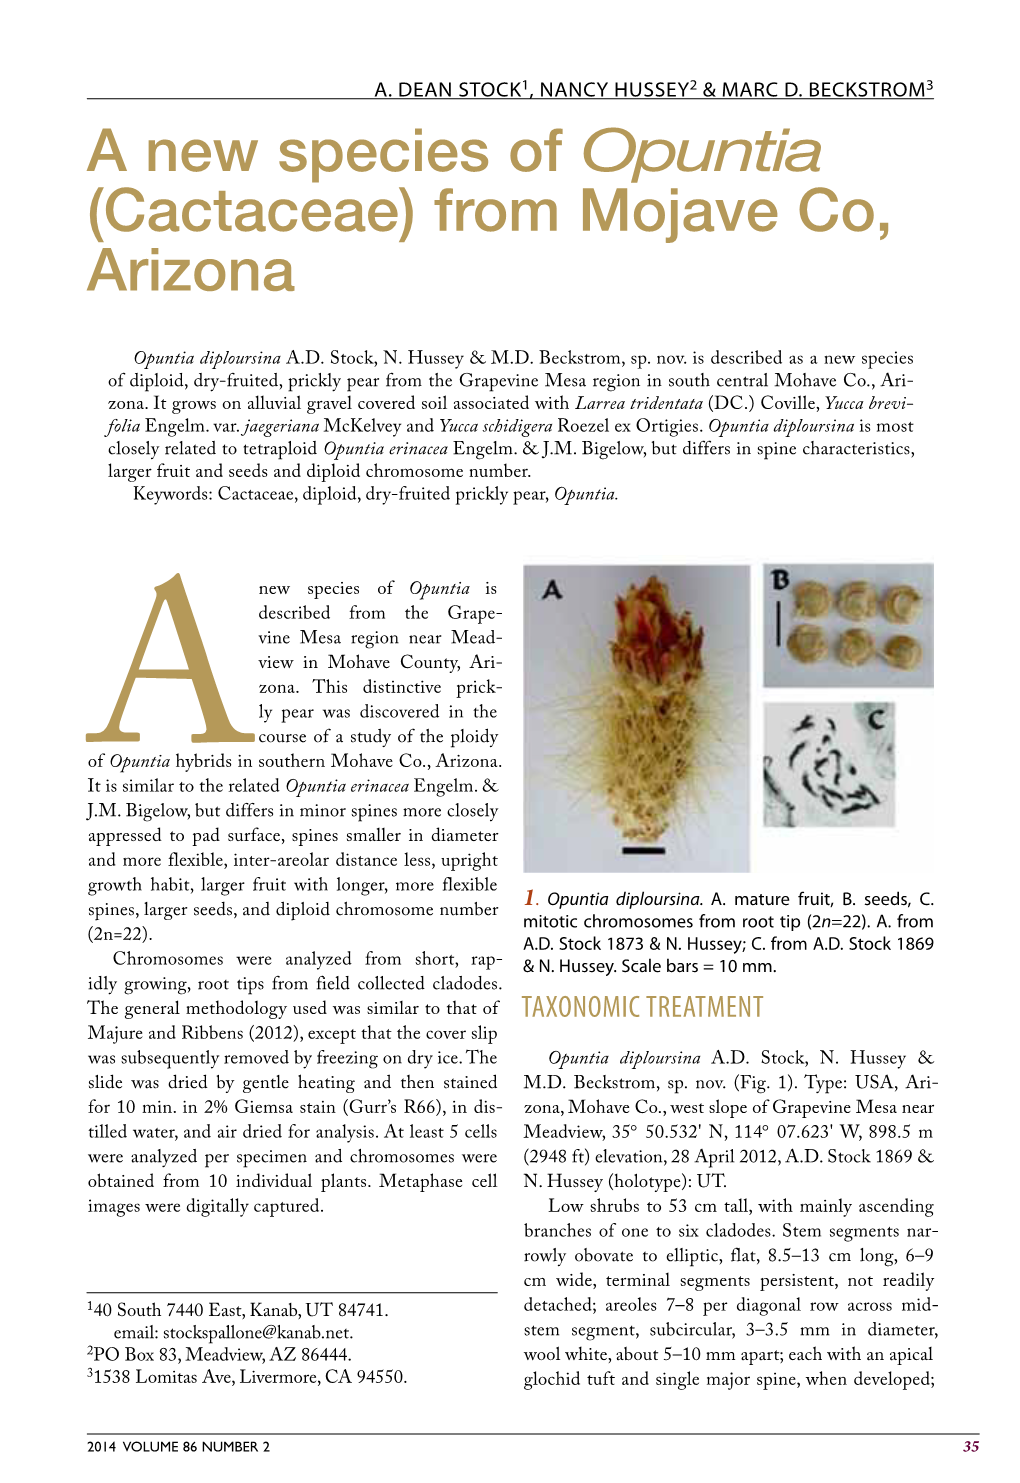 A New Species of Opuntia (Cactaceae) from Mojave Co, Arizona